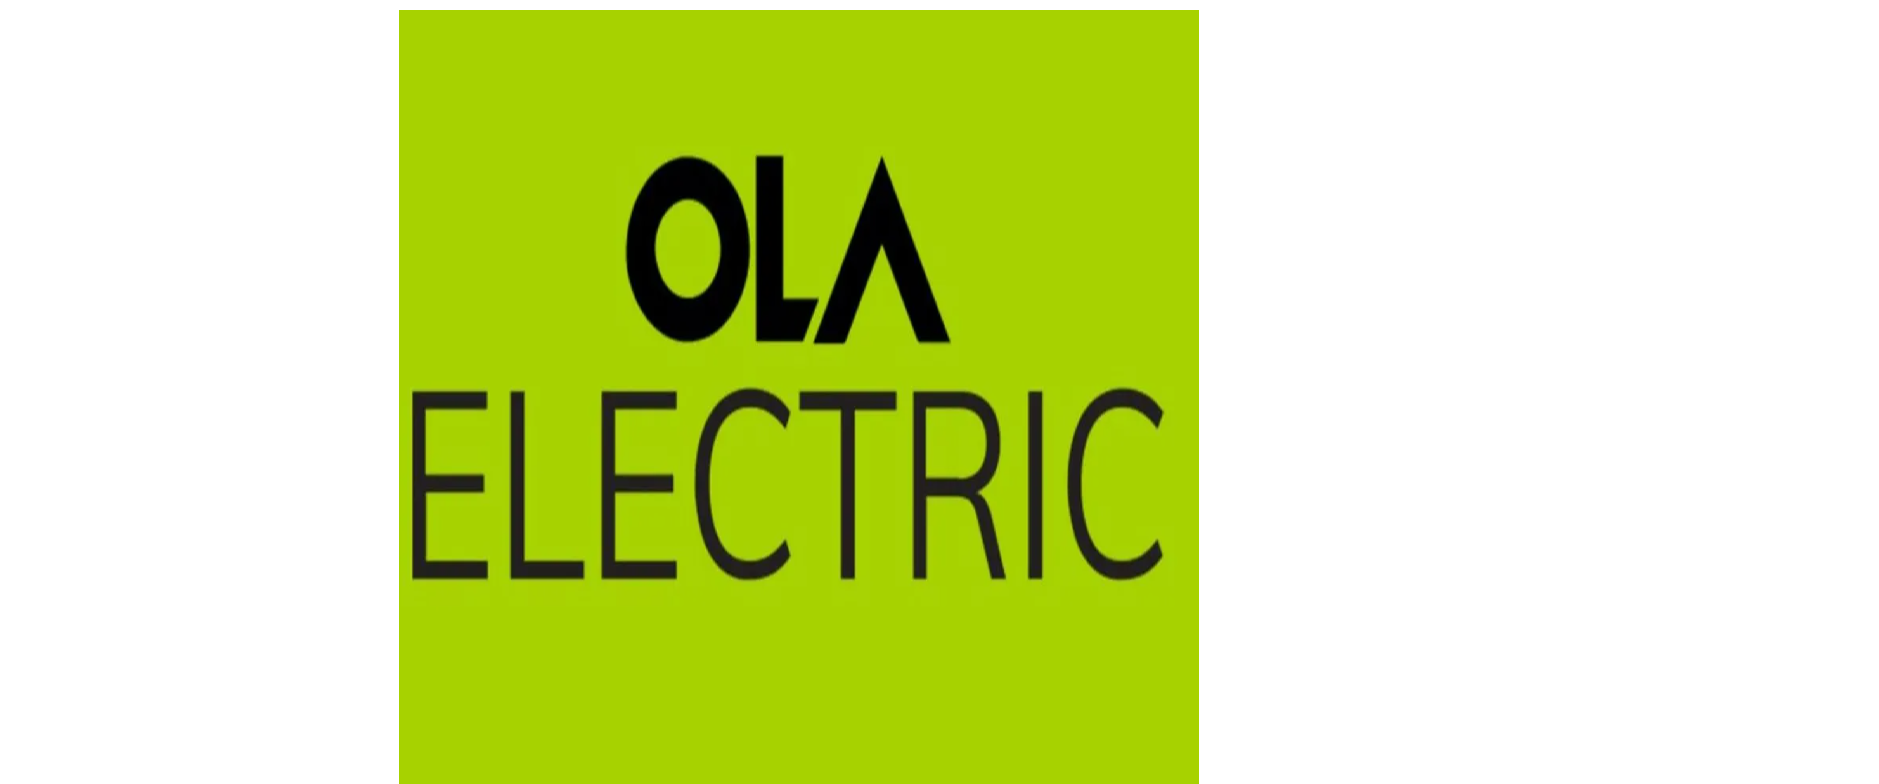 Ola Electric to open 500 experience centres across India by March this year